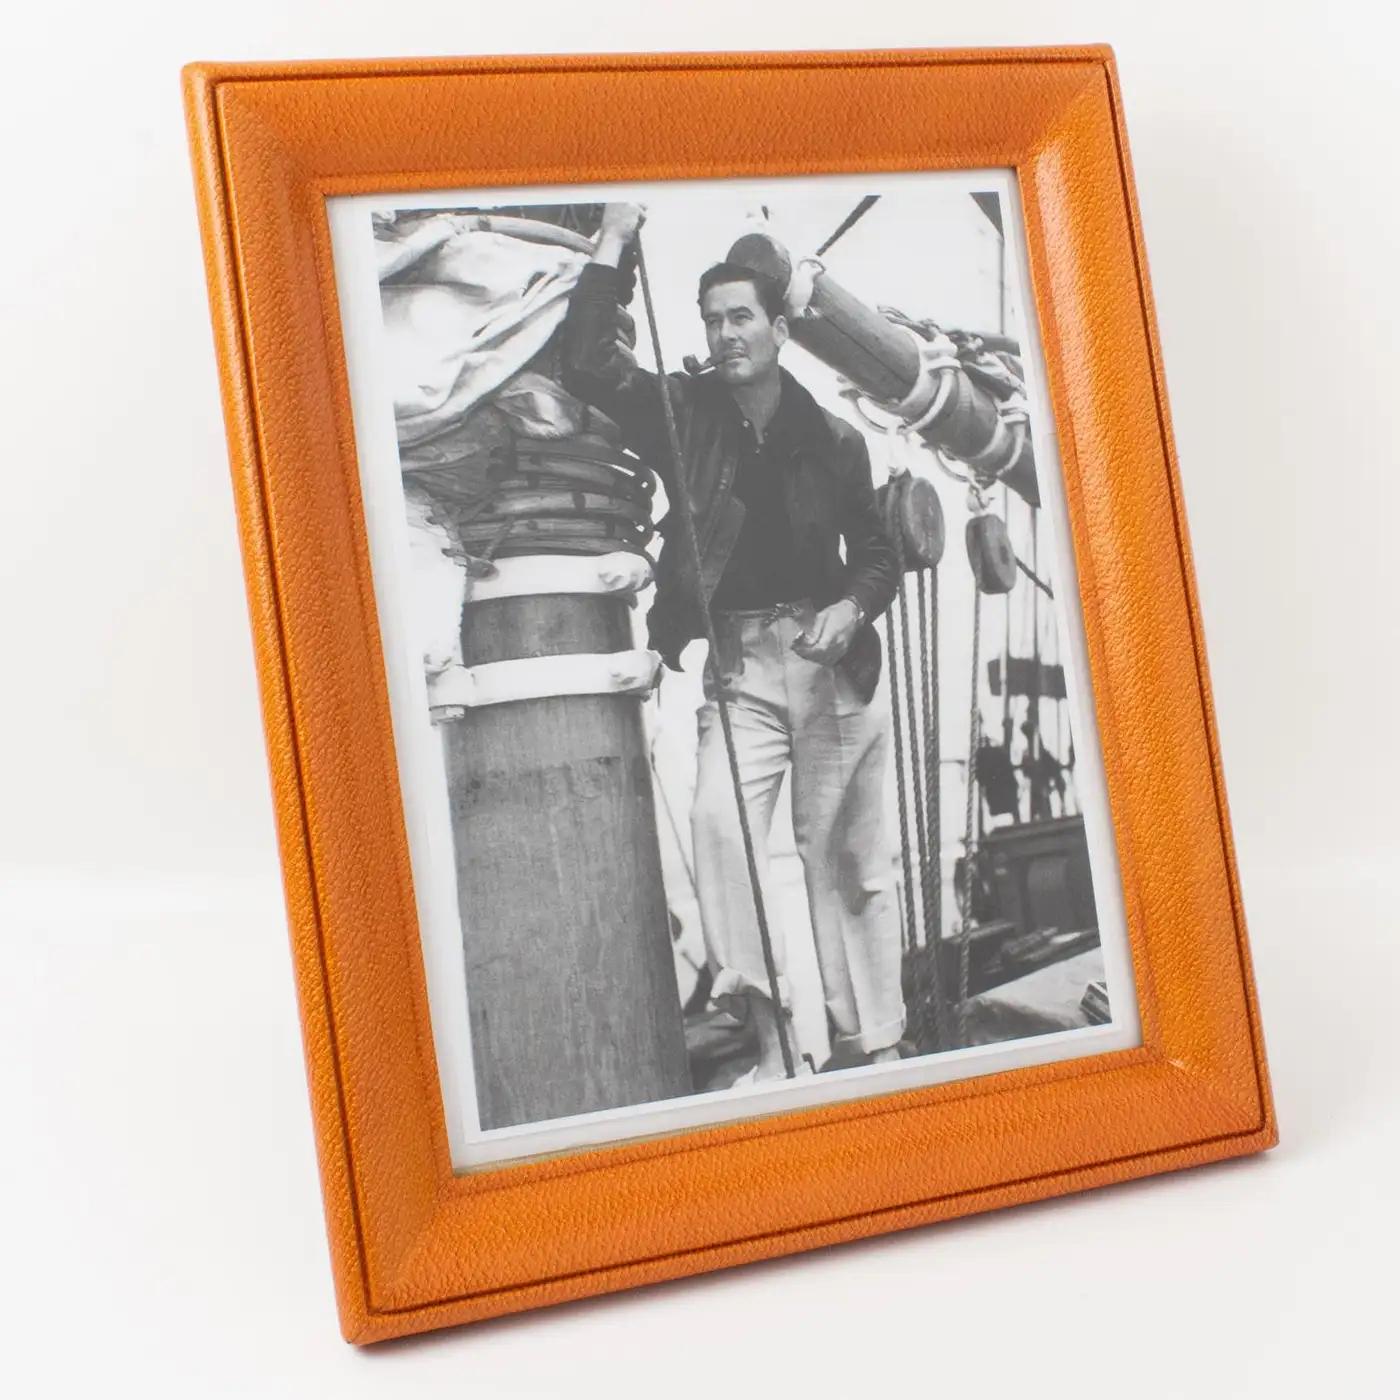 This Art Deco modernist leather picture photo frame was crafted in France circa 1940. The piece boasts fine-grain calf leather in a golden amber cognac color with a pattern. The easel and back are in decorative cognac suede paper and there is a